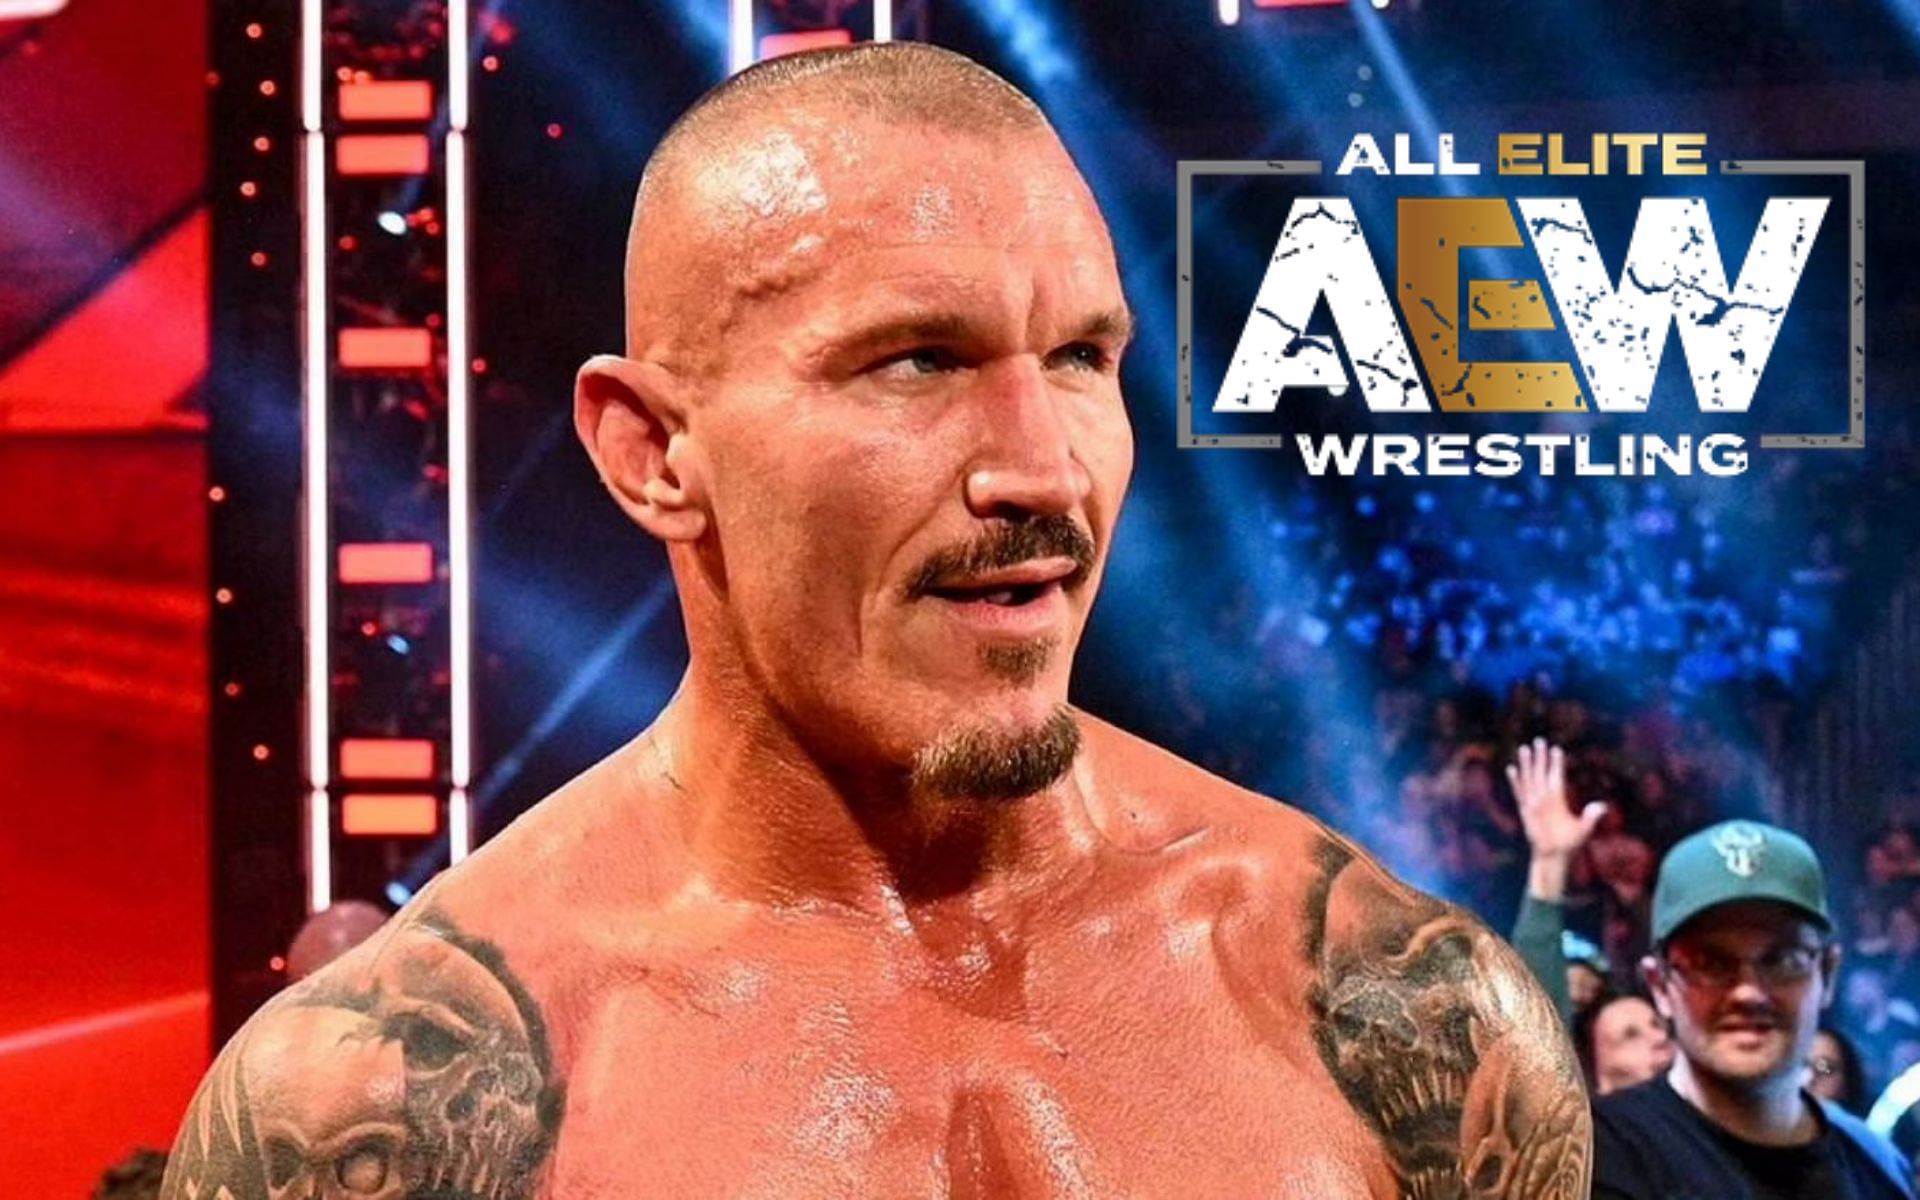 Randy Orton is indefinitely out of in-ring action